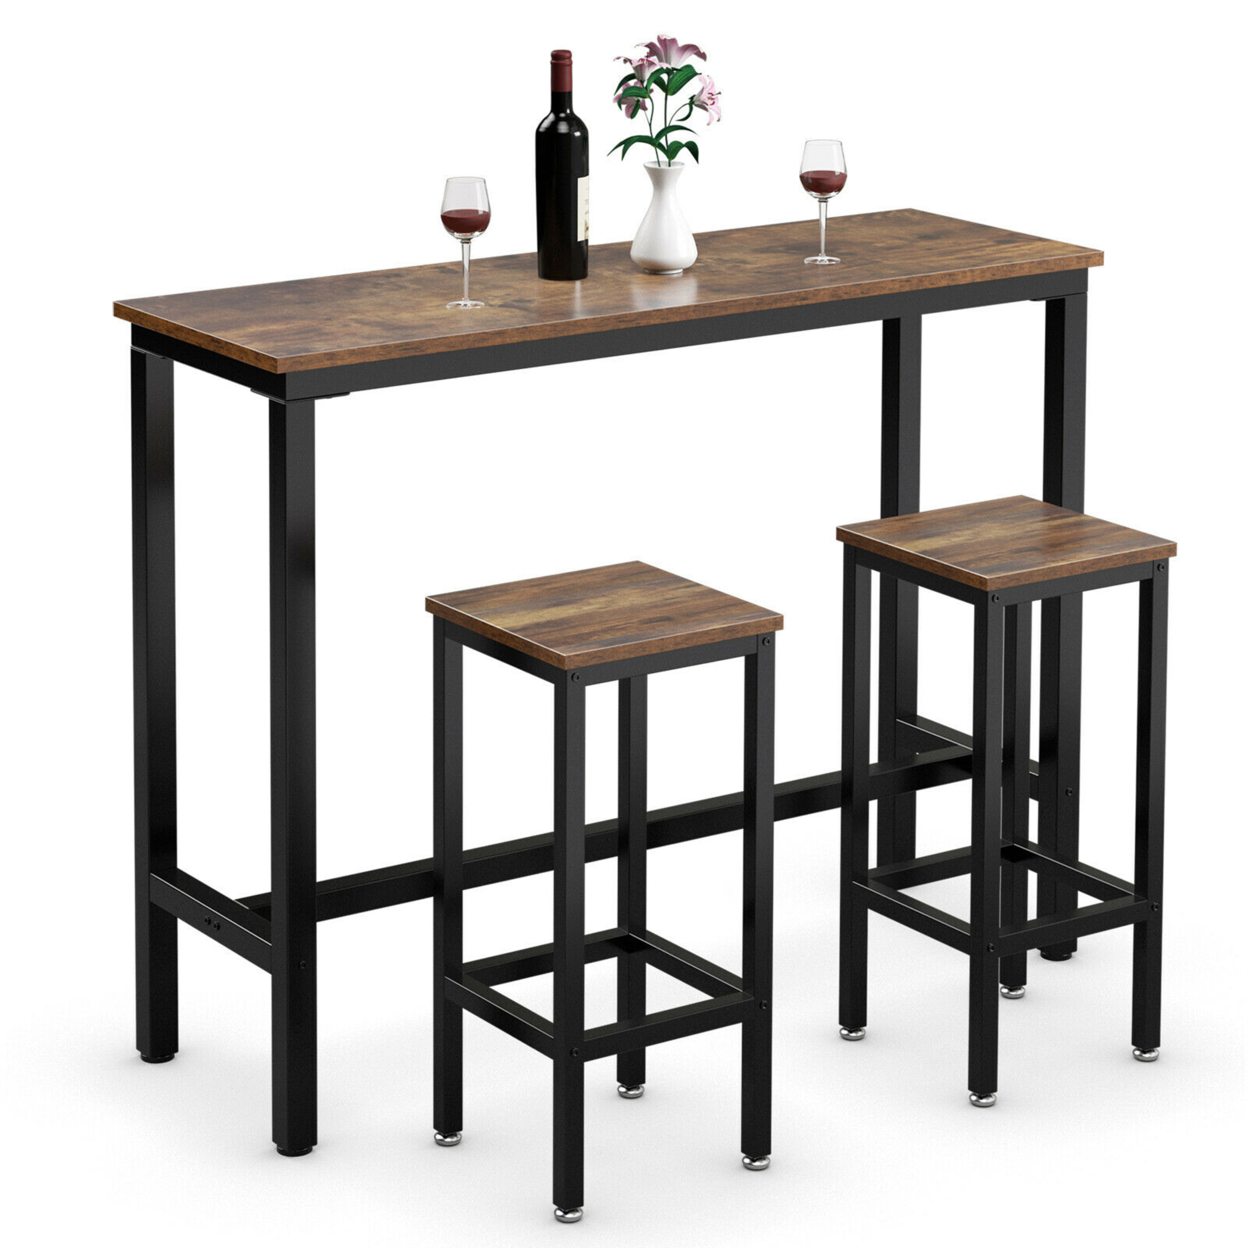 3 Pieces Bar Table Set Counter Height Bar Dining Table W/Stools Set Rustic Brown